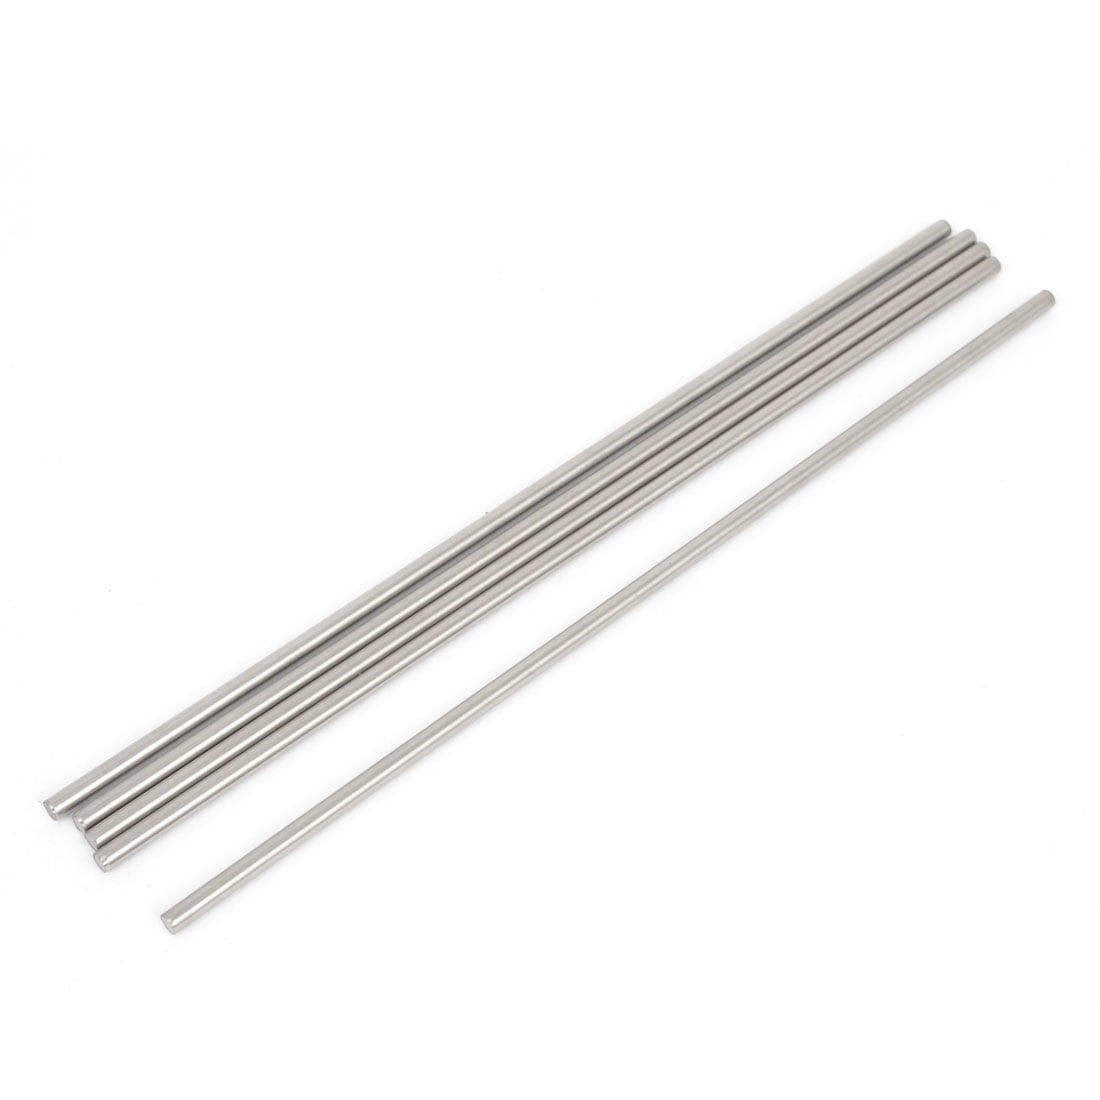 Glarks 2Pcs 5mm x 356mm Aluminum Straight Metal Round Shaft Rod Bar for DIY RC Model Car Model Ship 5mmx356 RC Helicopter Airplane 